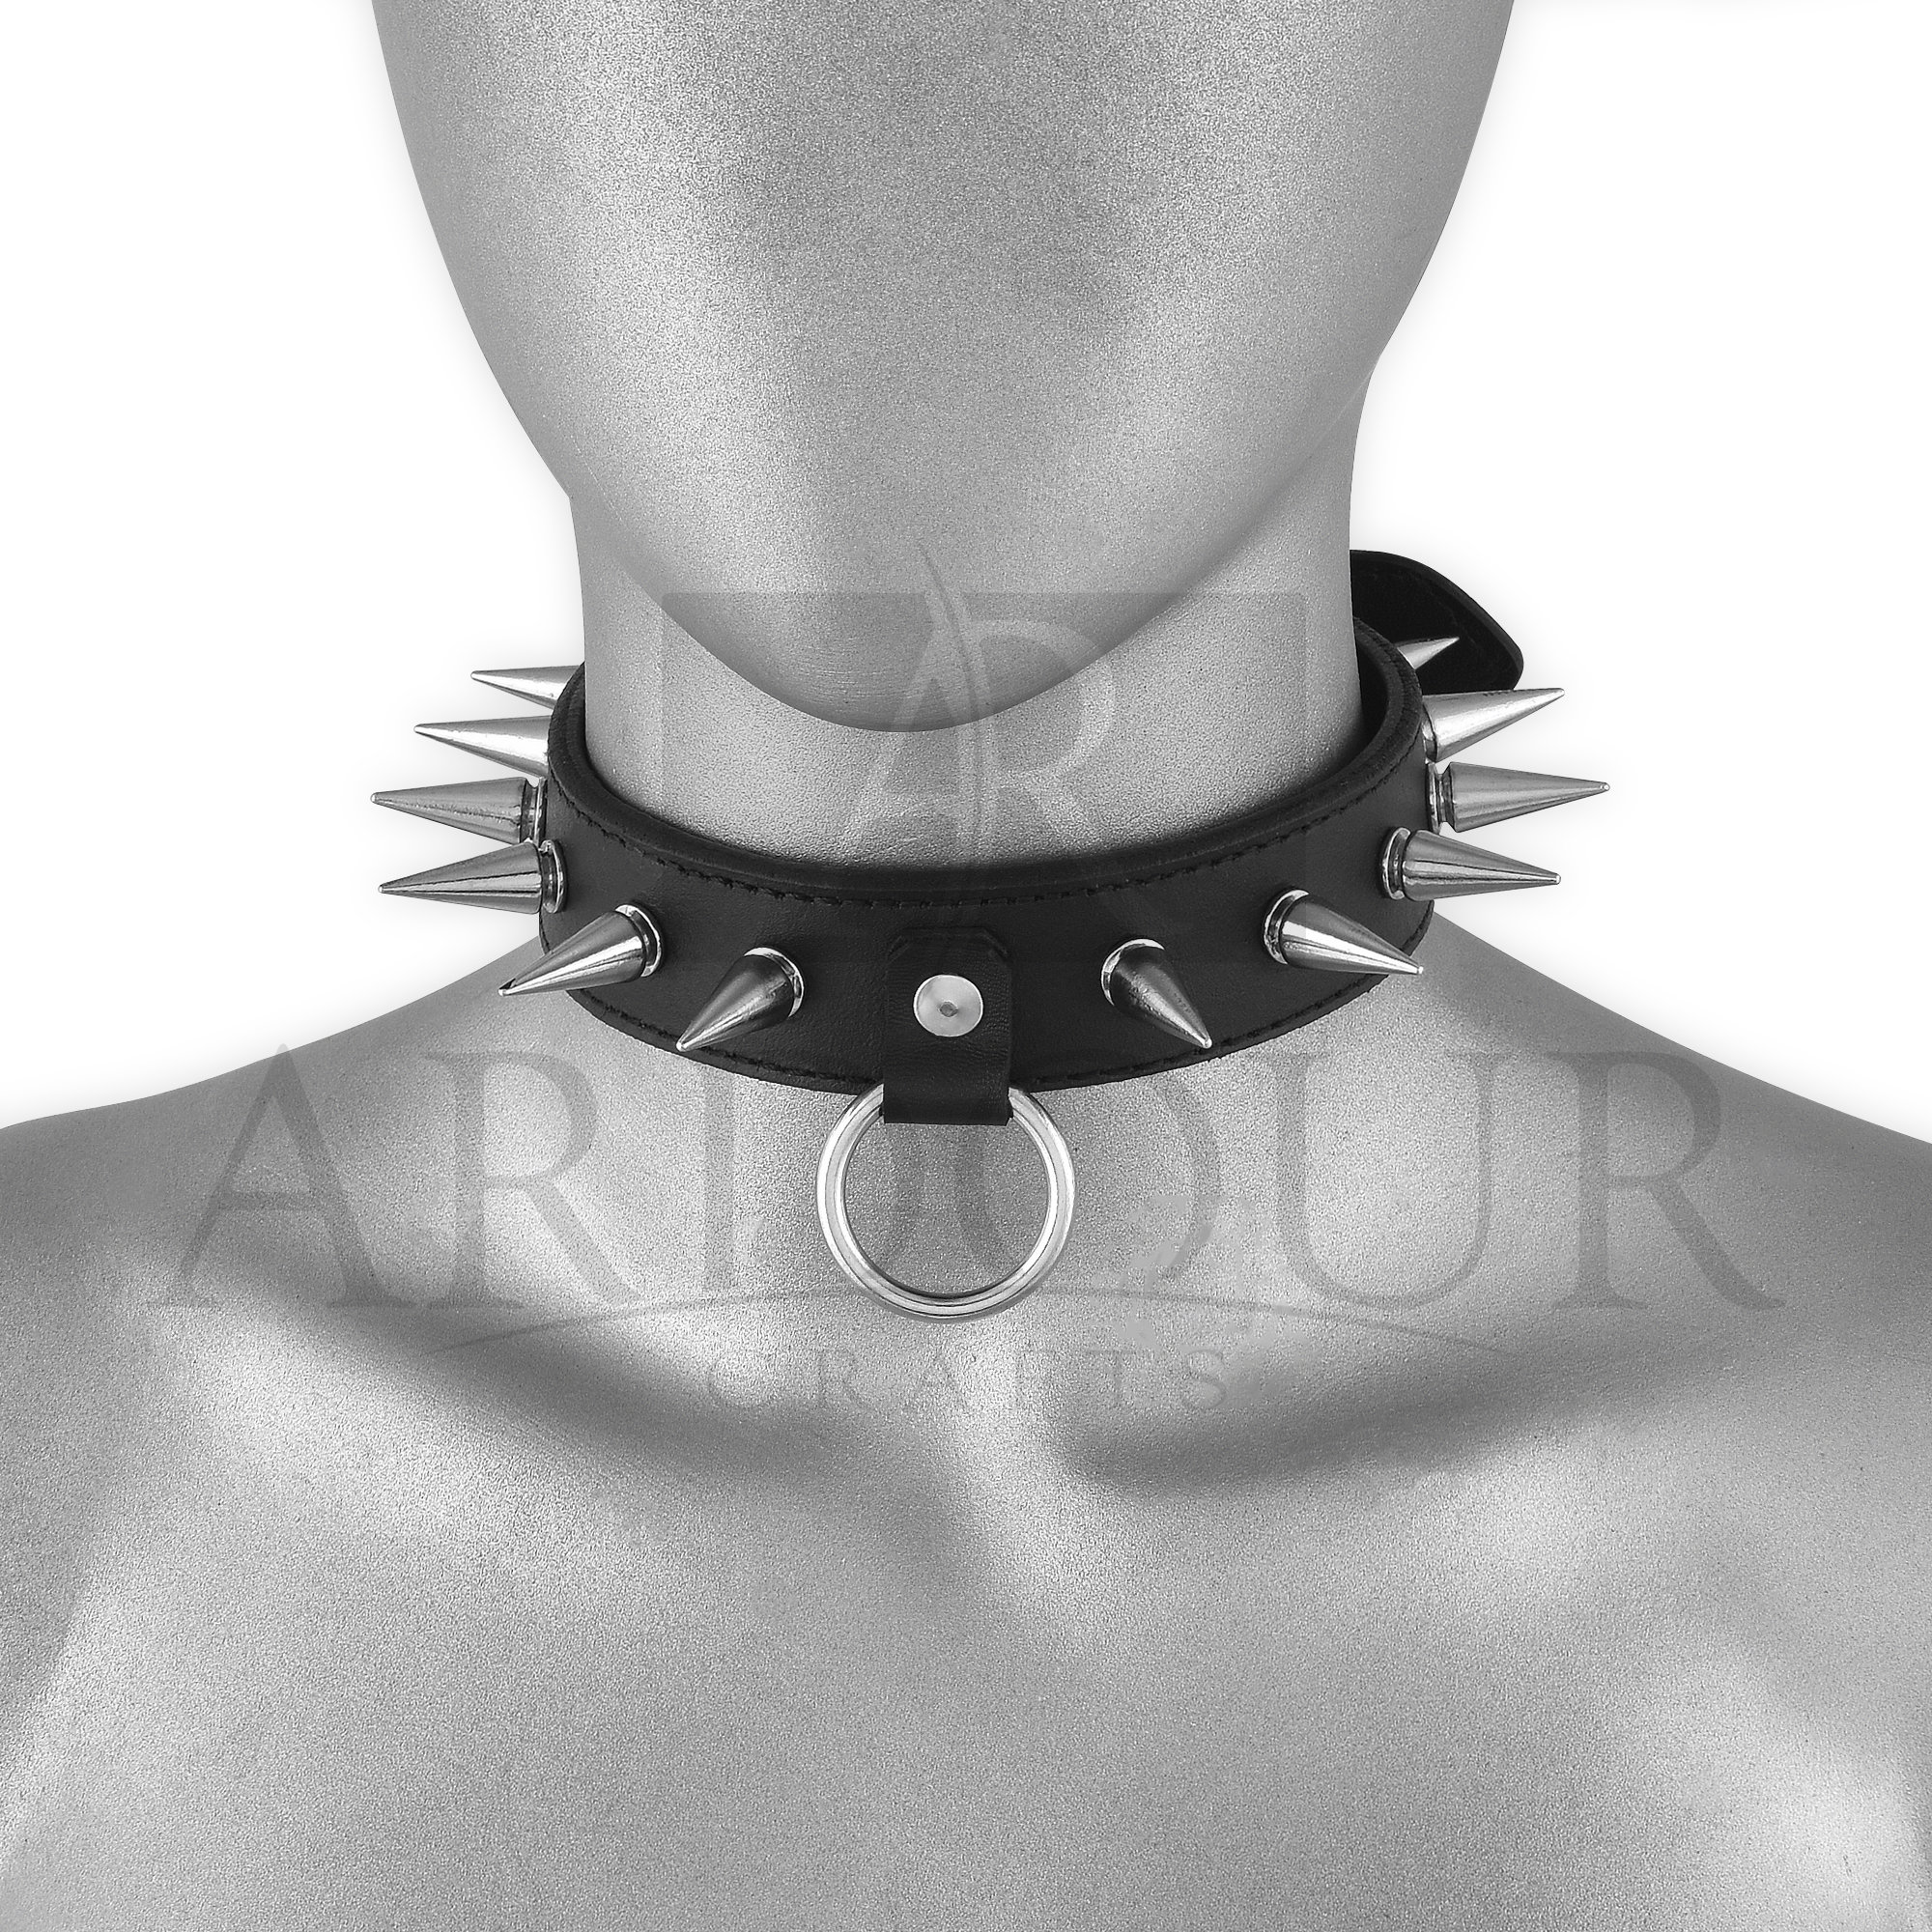 Choker Necklace Spike Collars Punk Chains Leather Emo Metal Spiked Studded